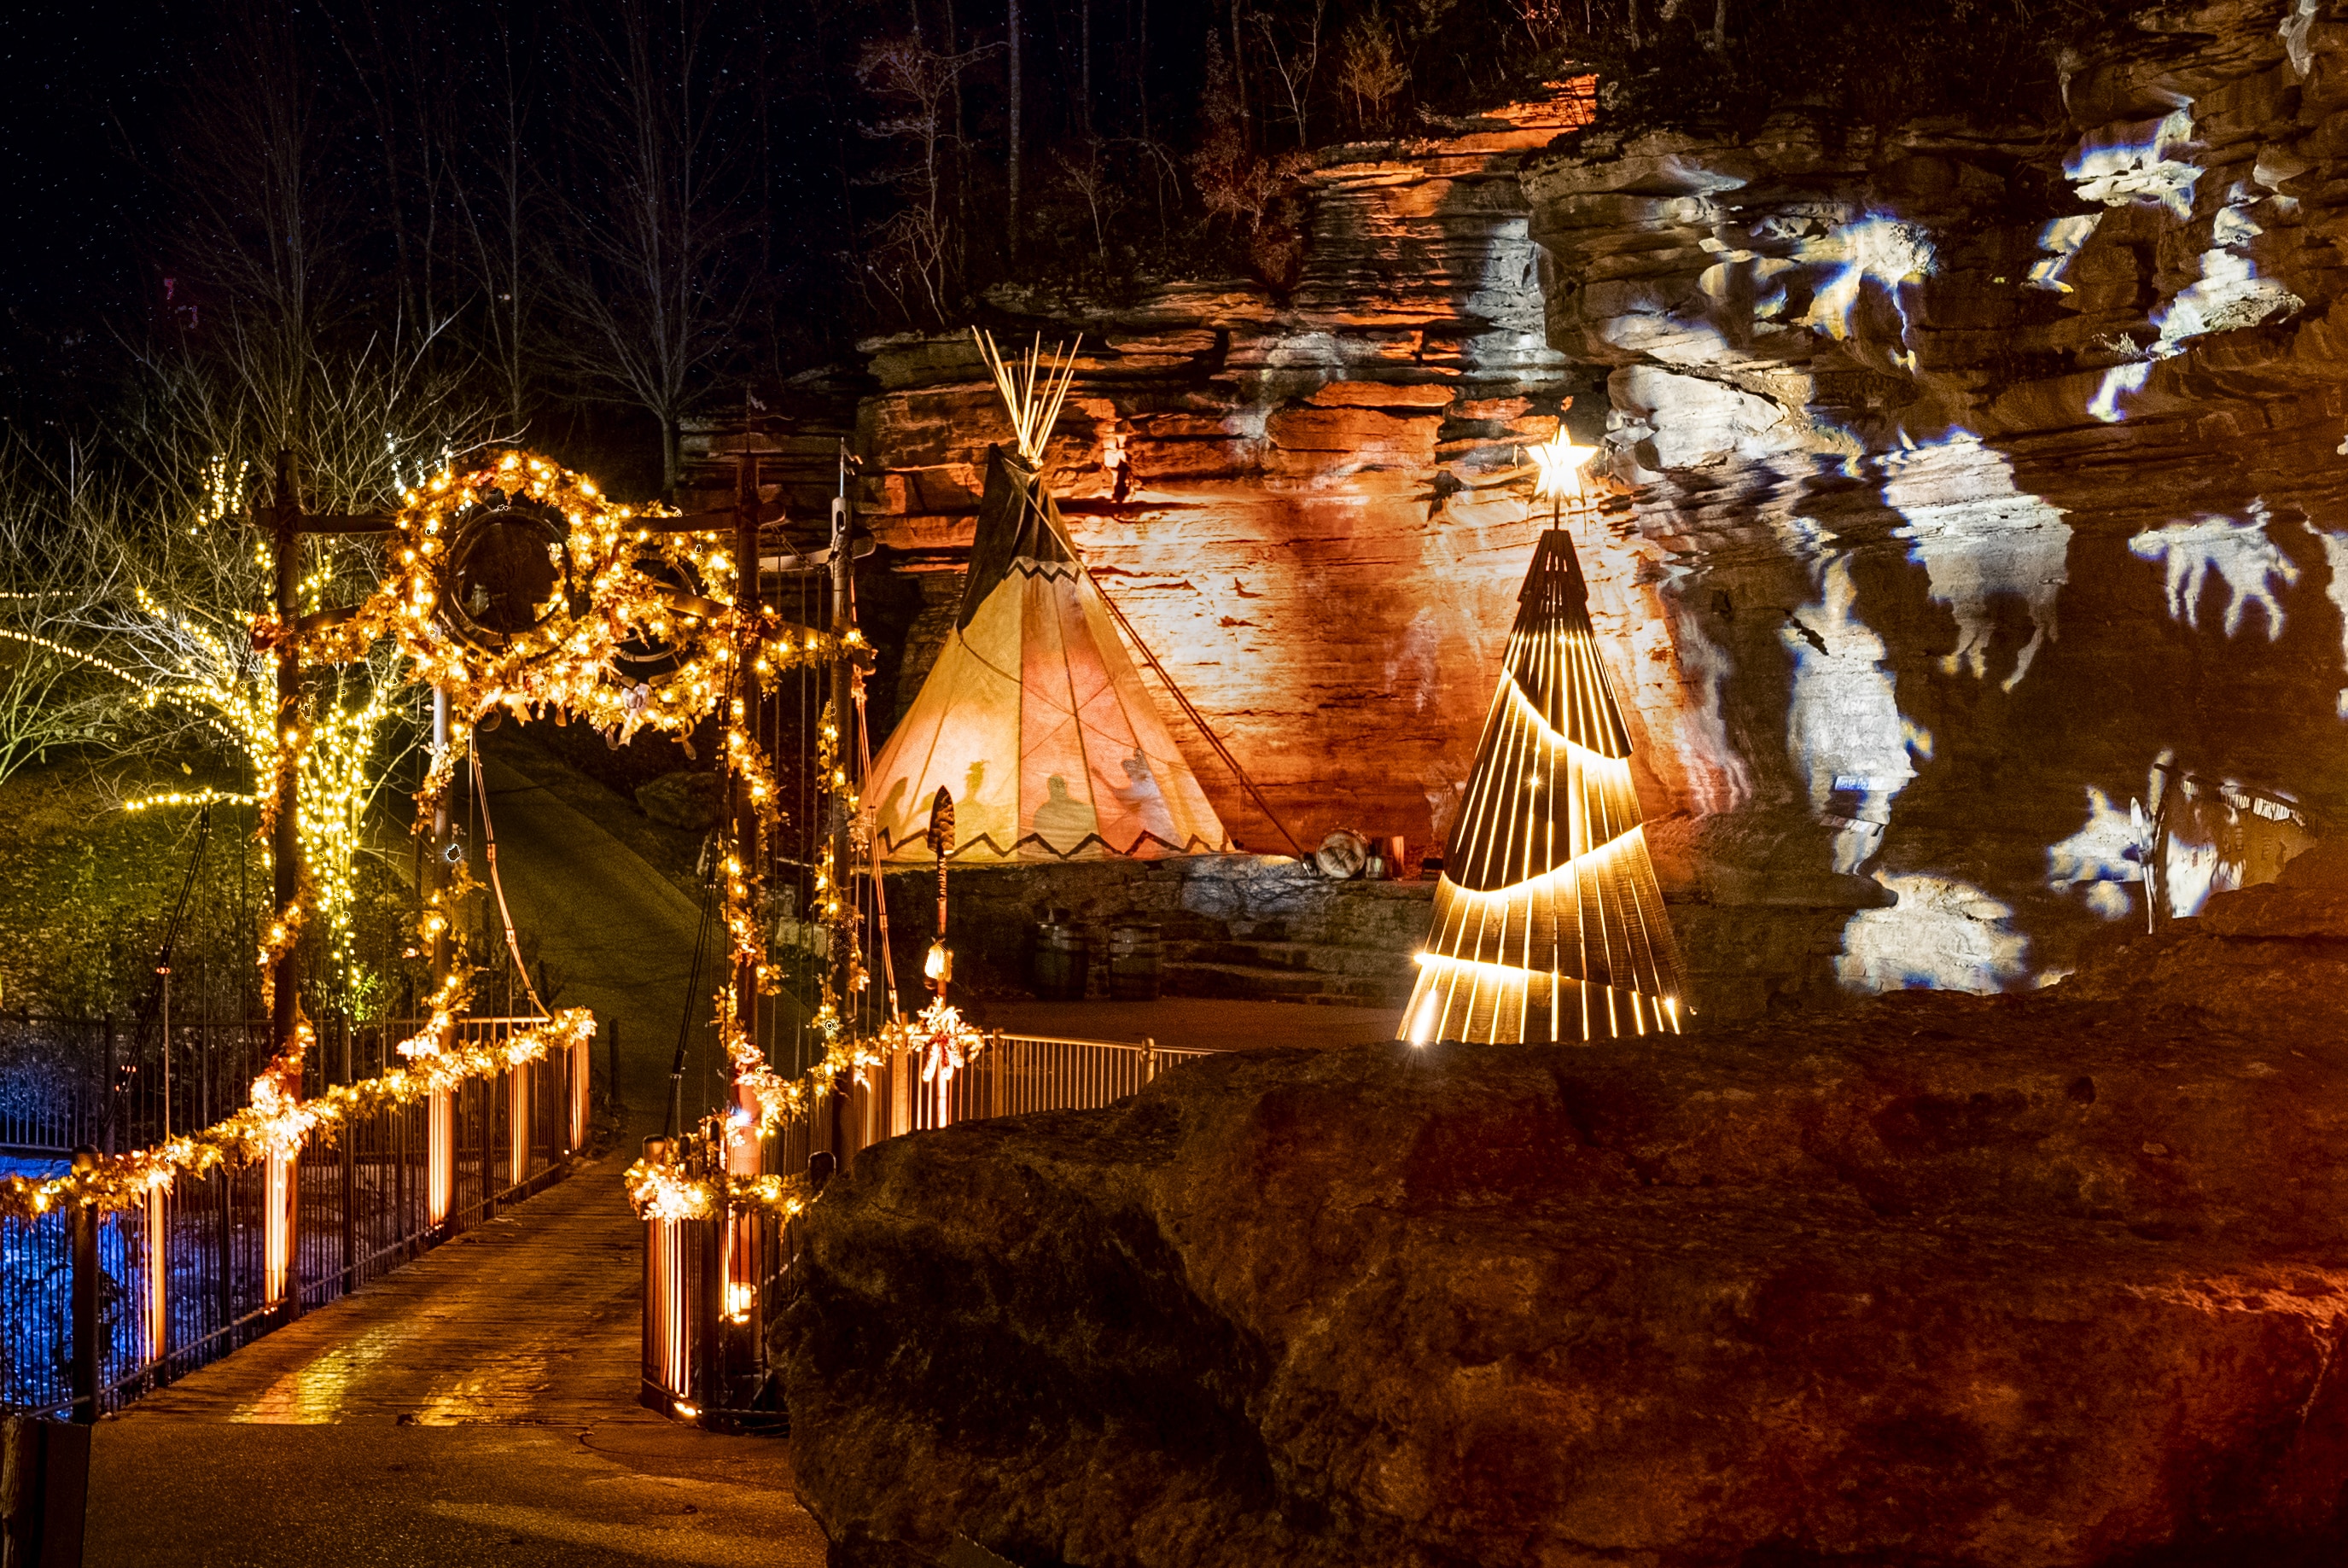 lost canyon cave christmas tour